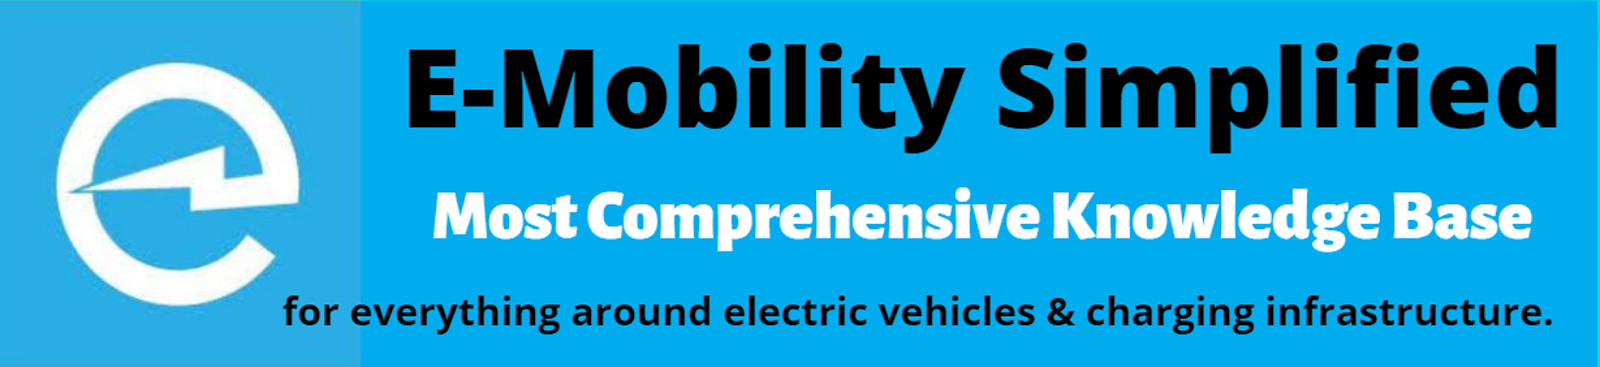 E-Mobility Simplified | Basics of Electric Vehicles and Charging